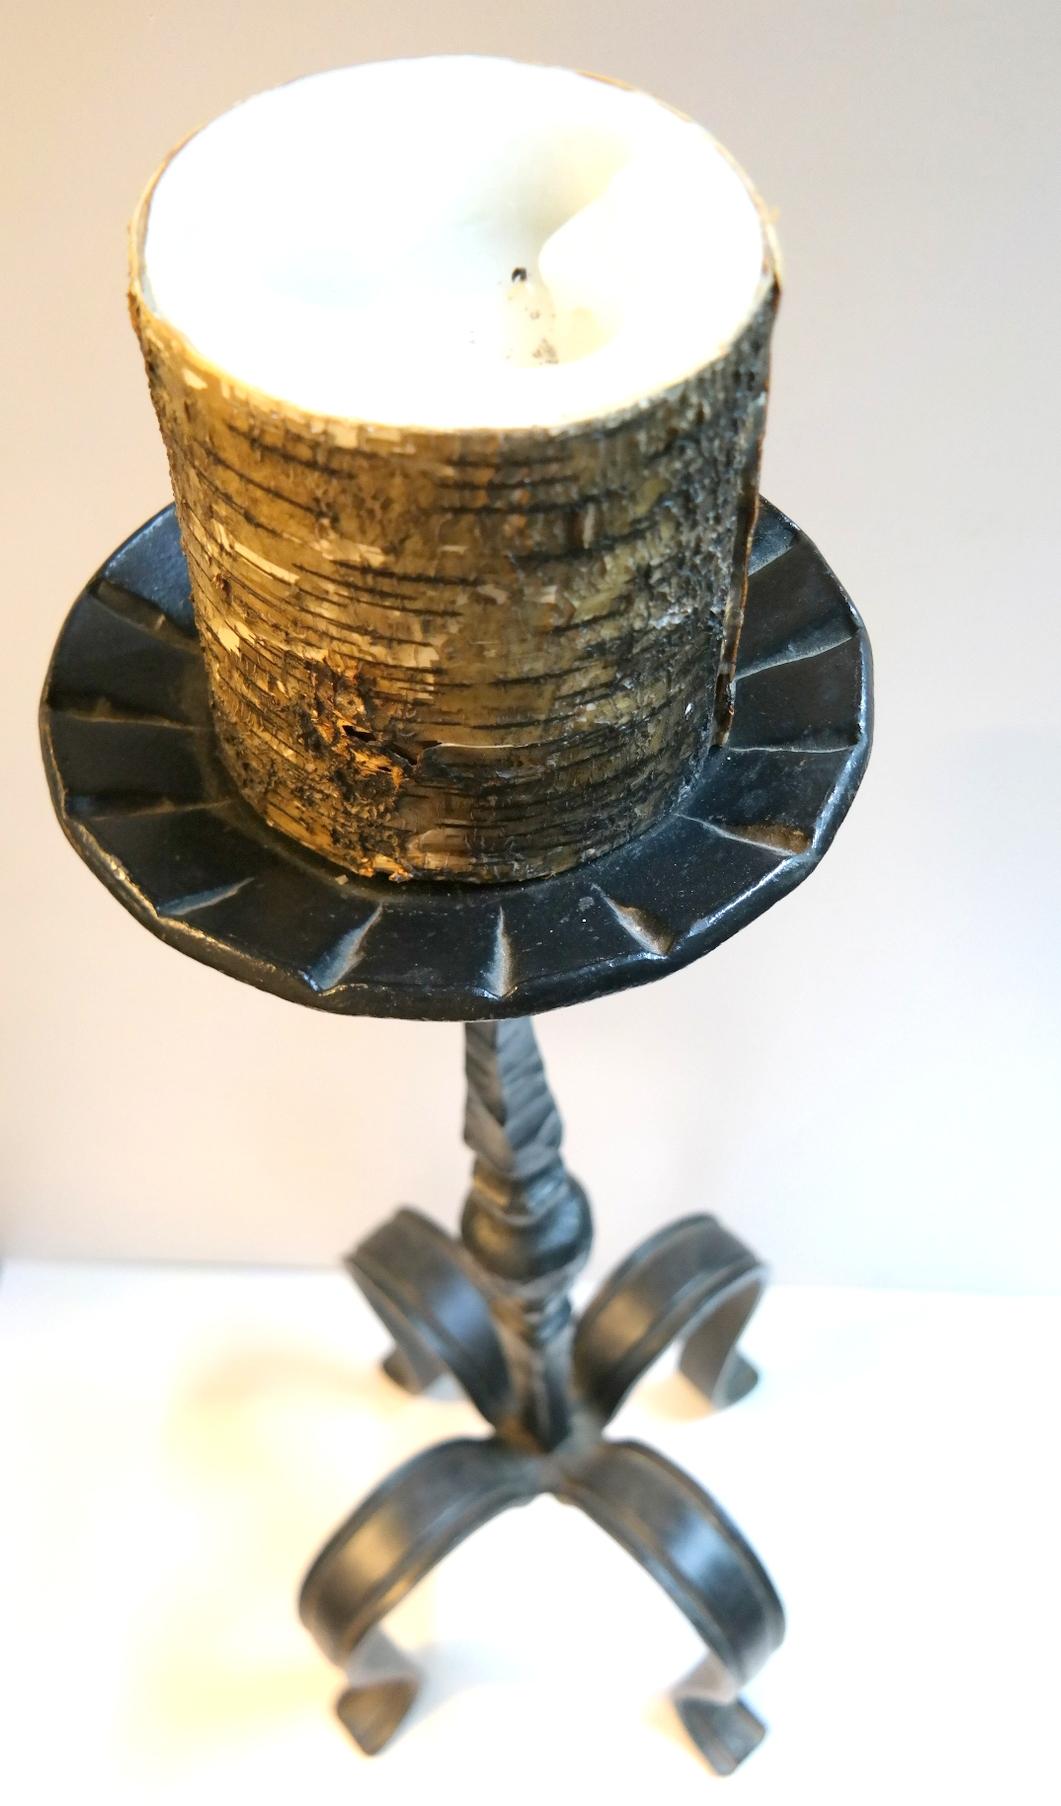 Handcrafted wrought iron floor candleholder, 1970s.